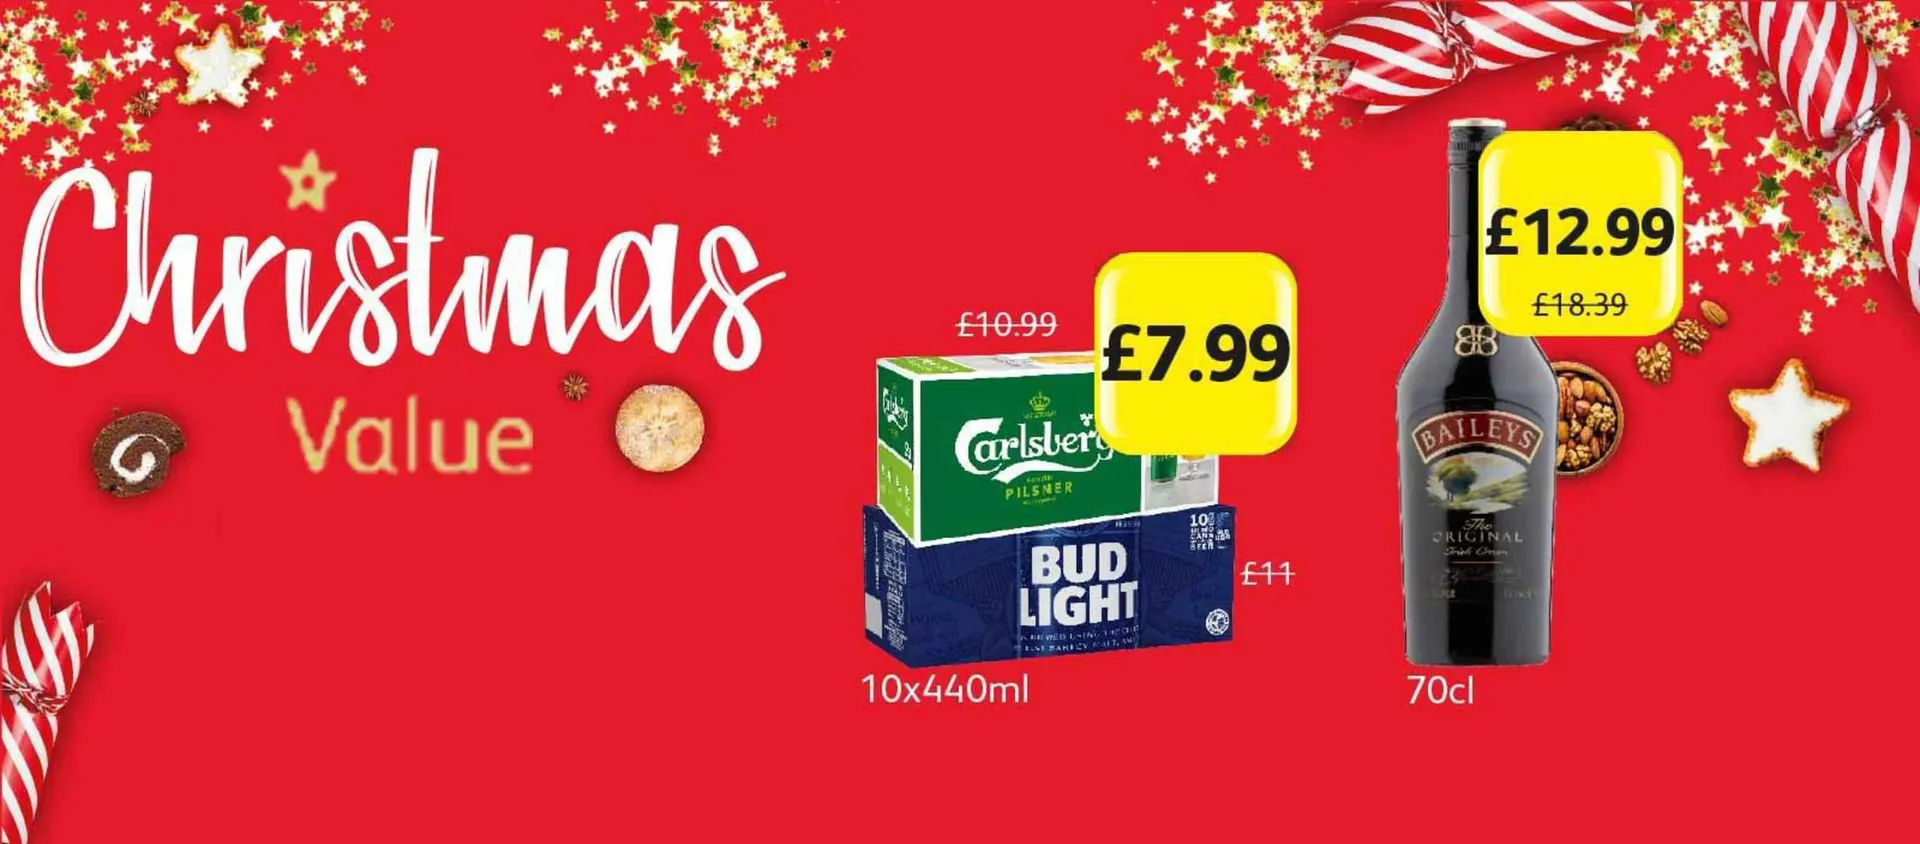 Londis Weekly Offers